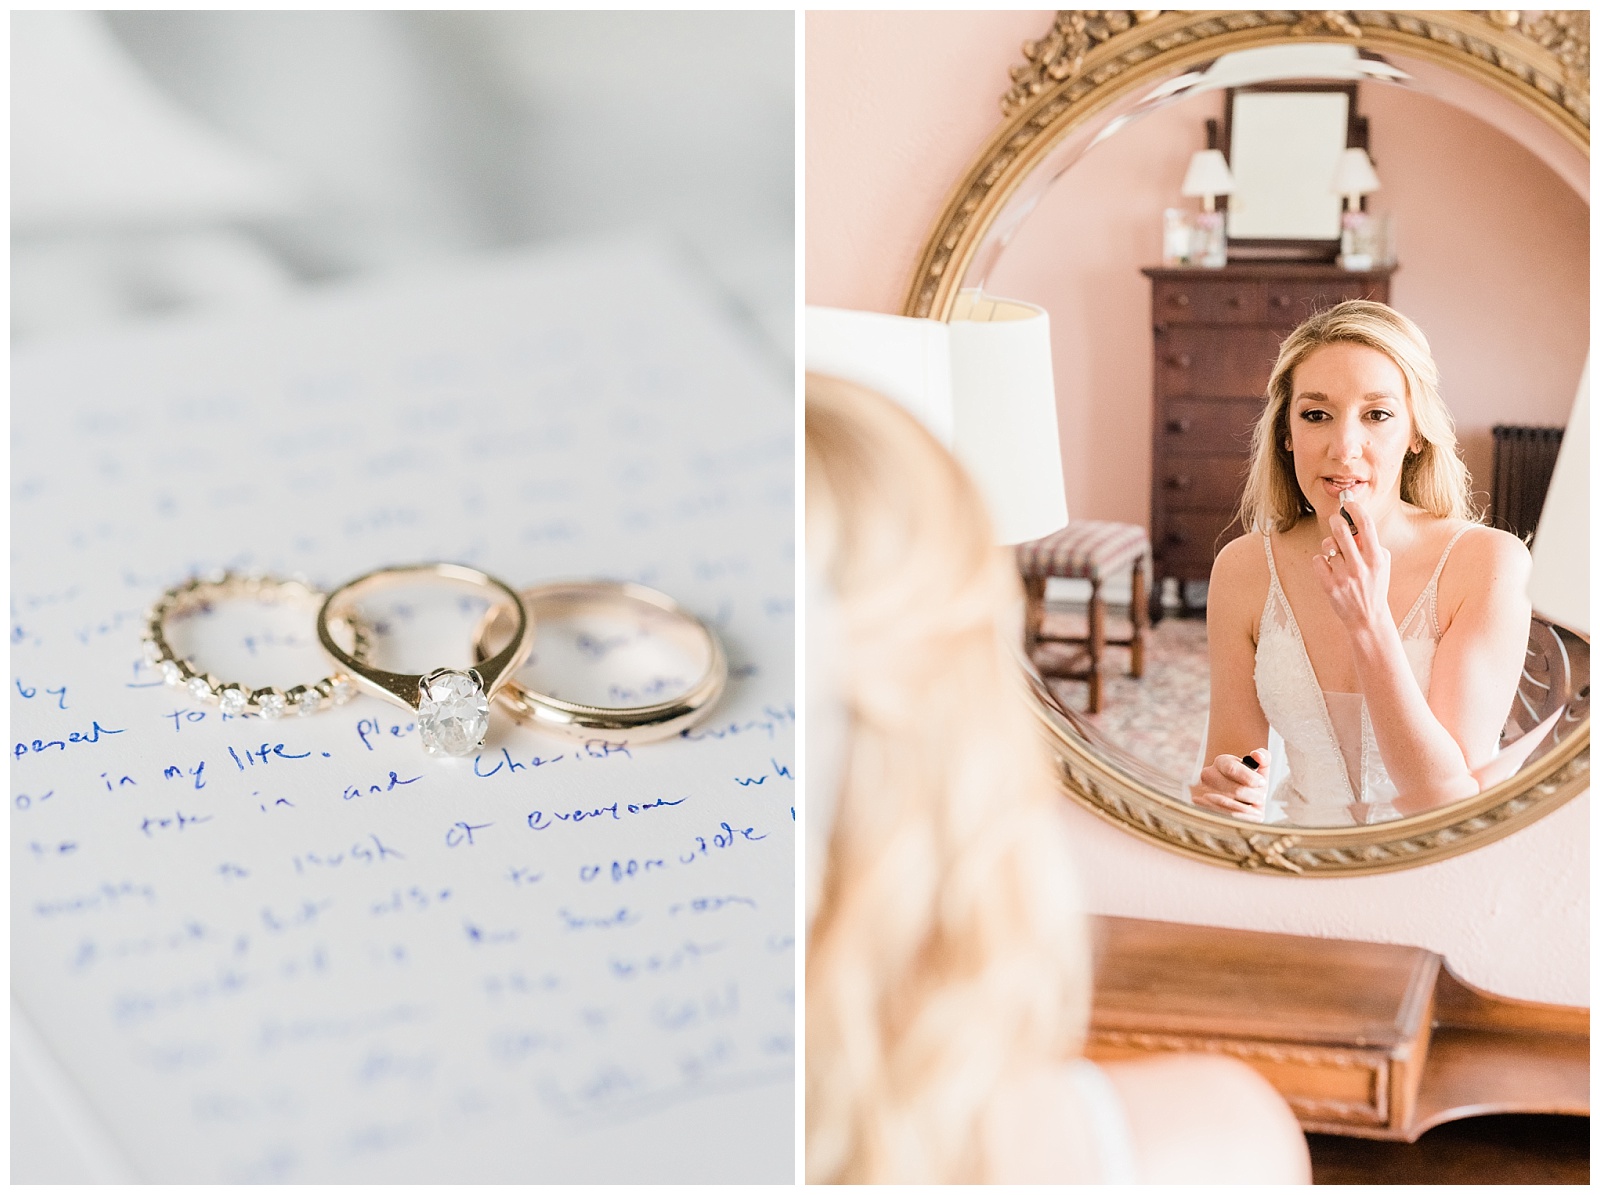 Wedding rings sit on a love letter, and a bride touches up her makeup in the mirror.